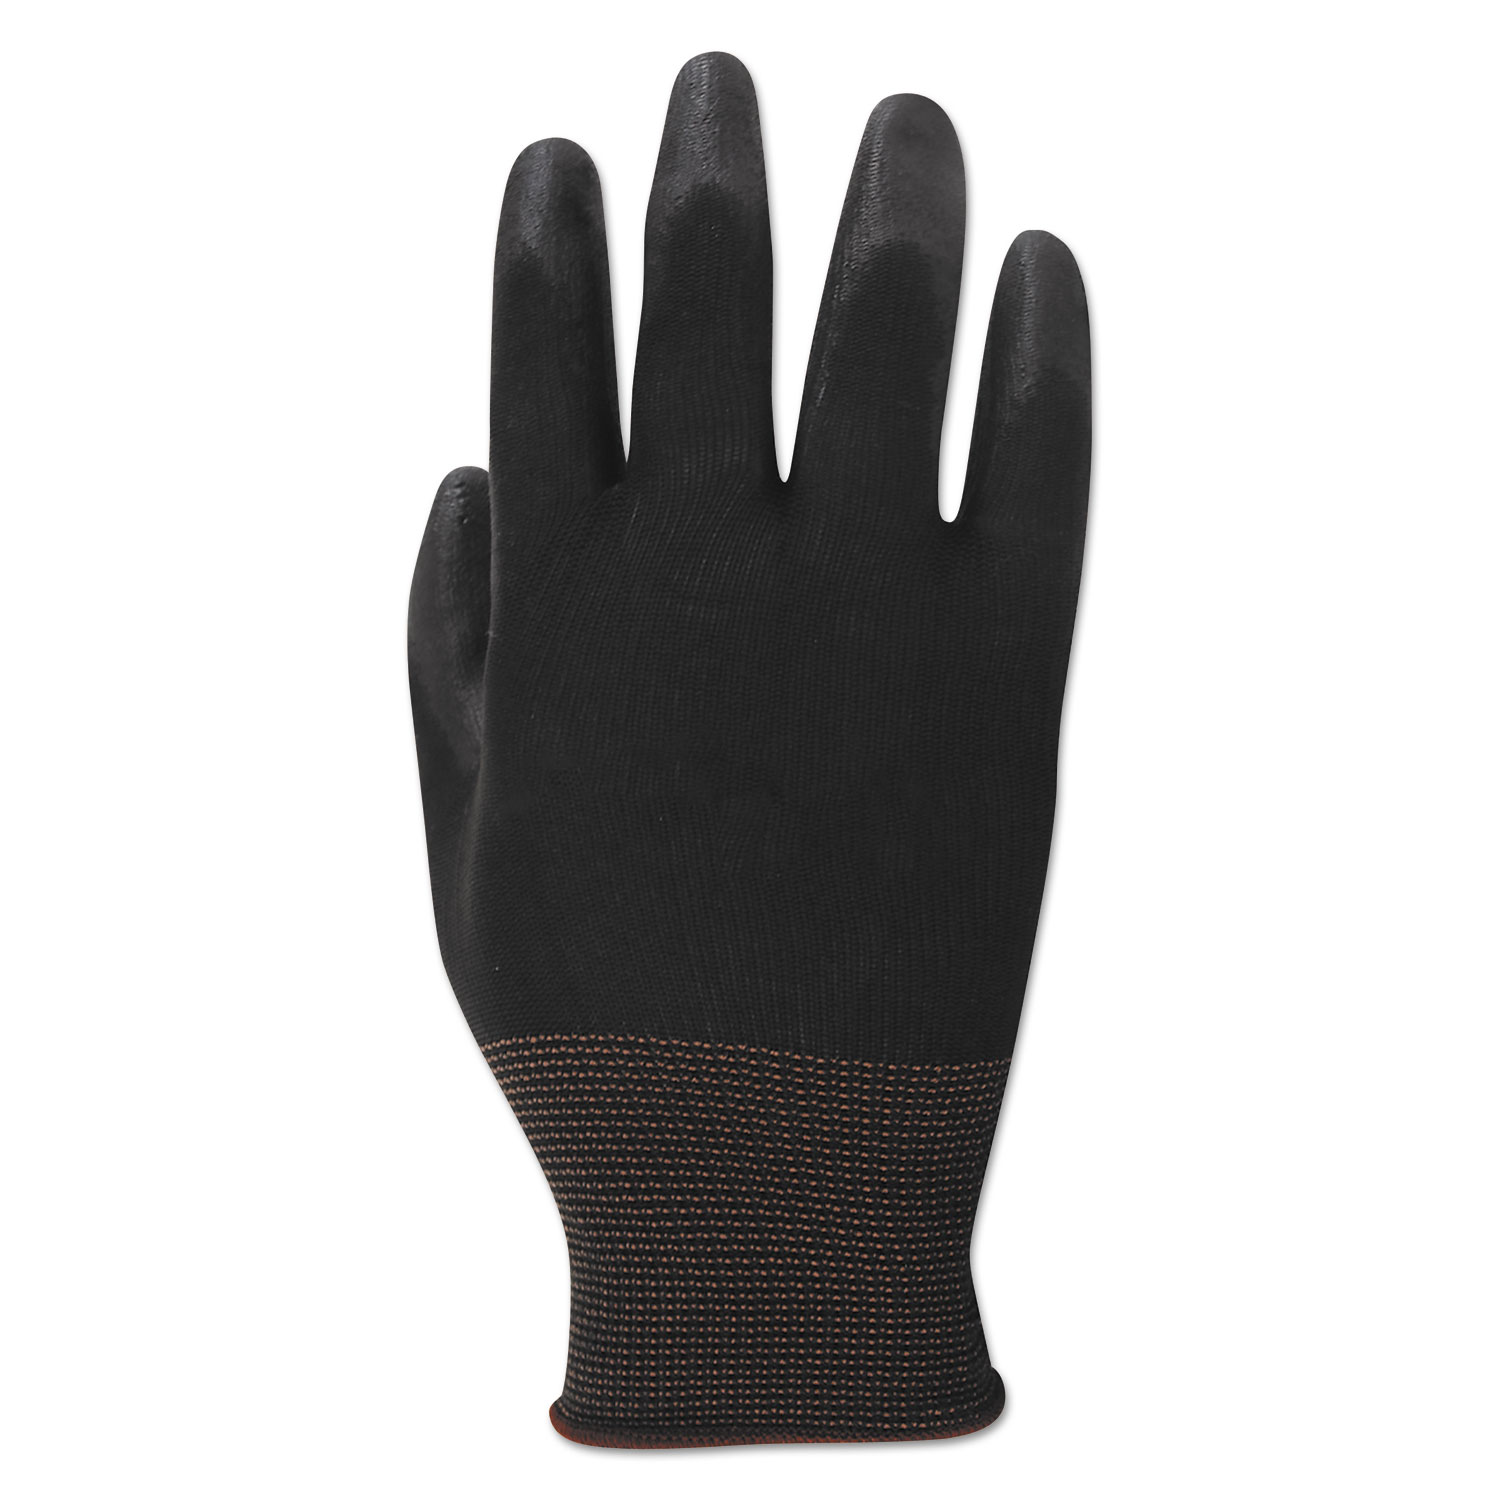 PVC-Dotted Cotton/Polyester Work Gloves, Large, Gray/Black, 12 Pairs -  Zerbee